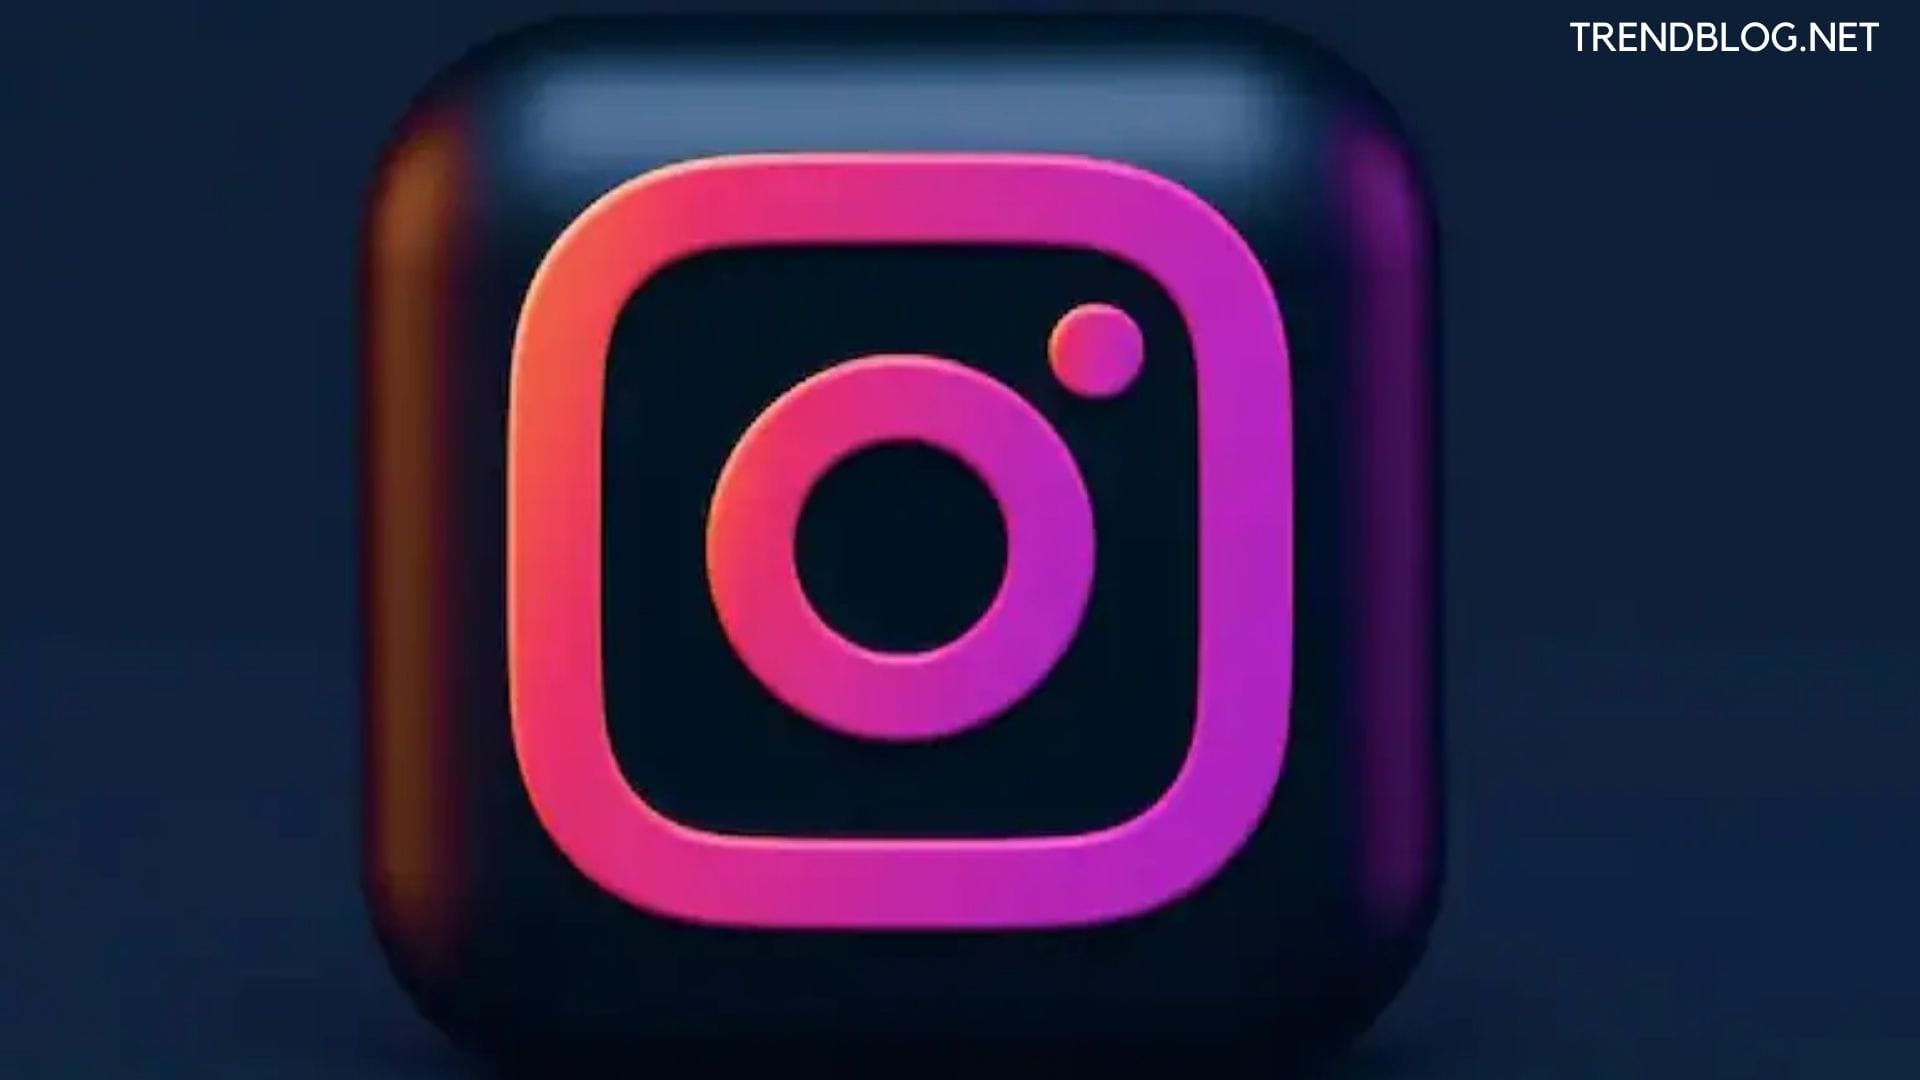  How to Change Username on Instagram: 2022 Updated